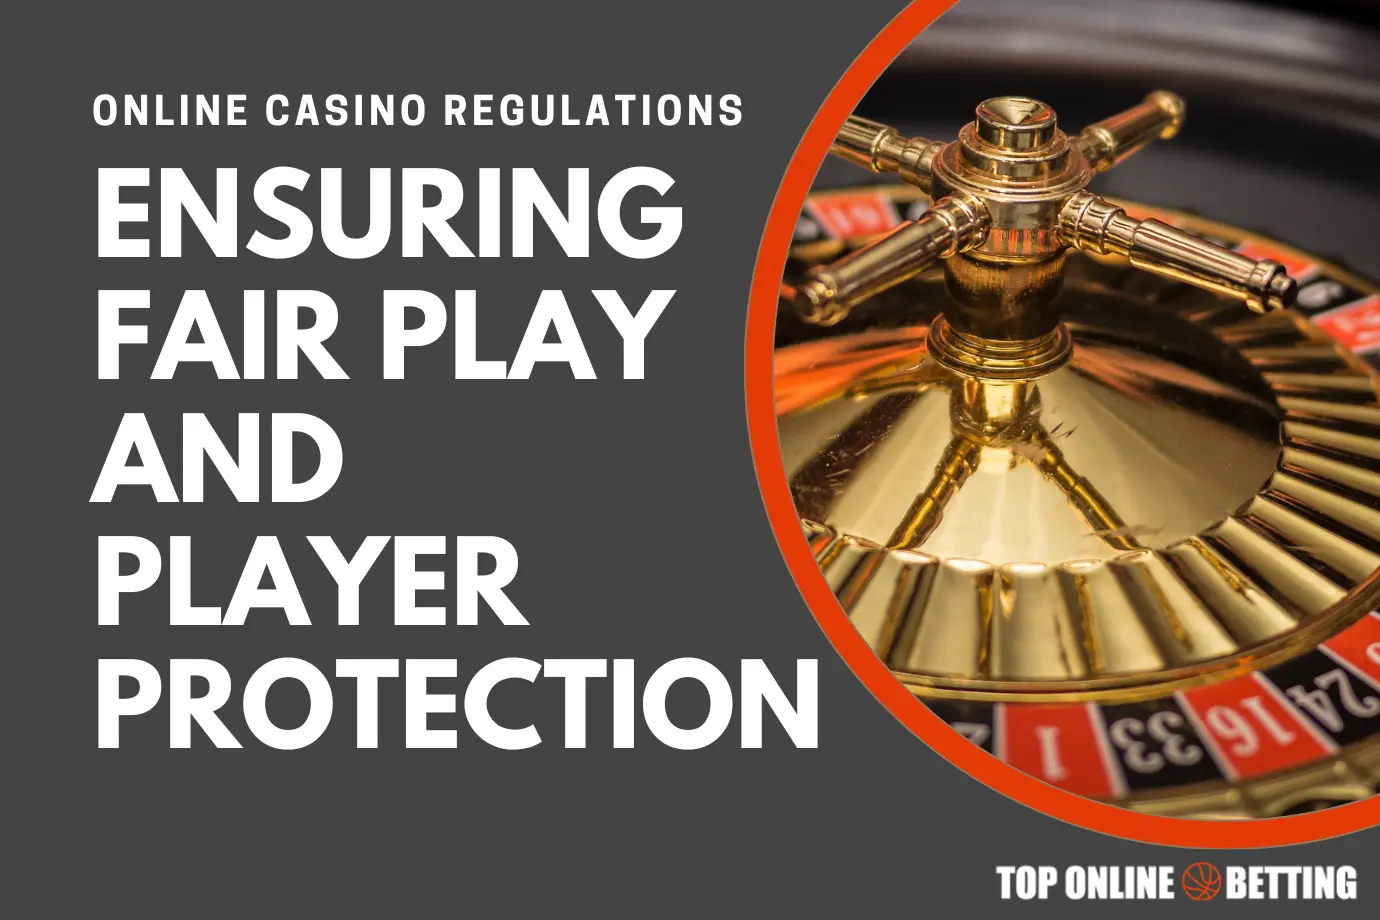 Online Casino Regulations Ensuring Fair Play and Player Protection